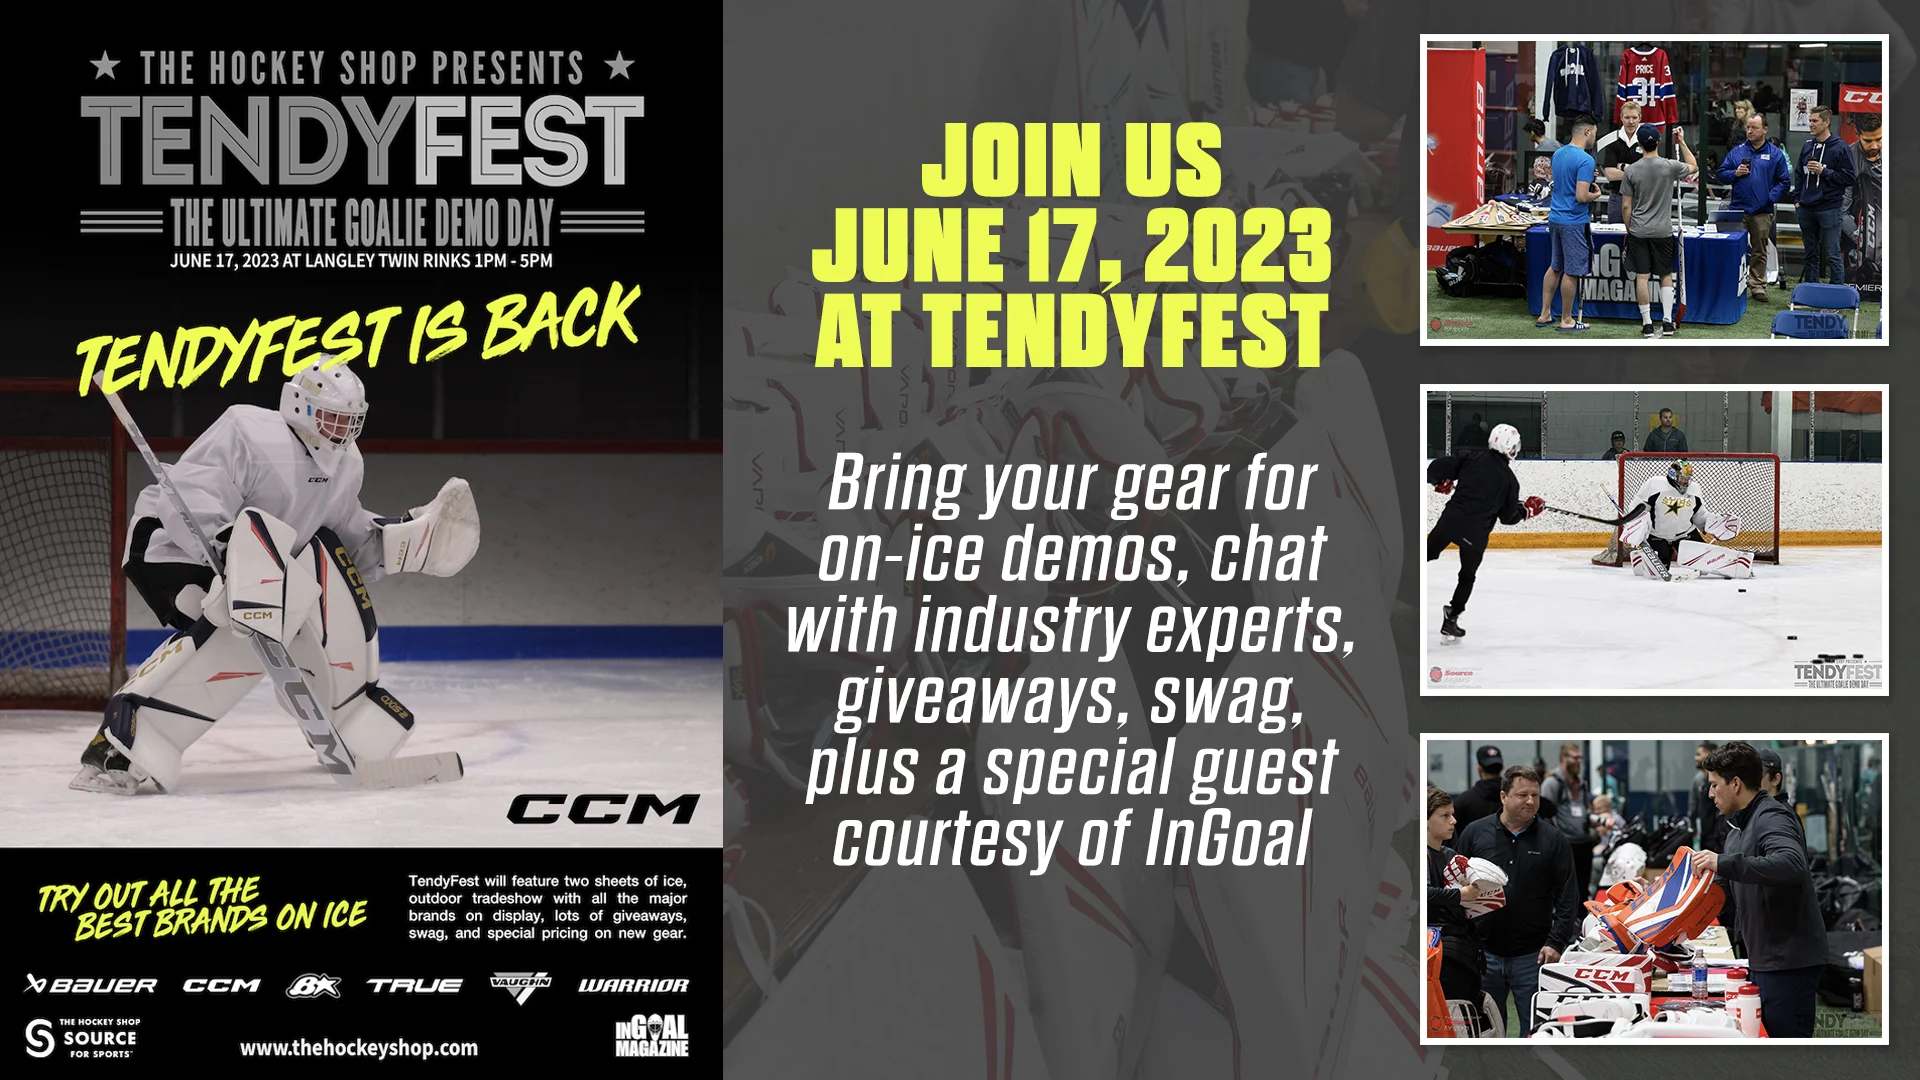 Join us at TendyFest June 17, 2023 in Vancouver